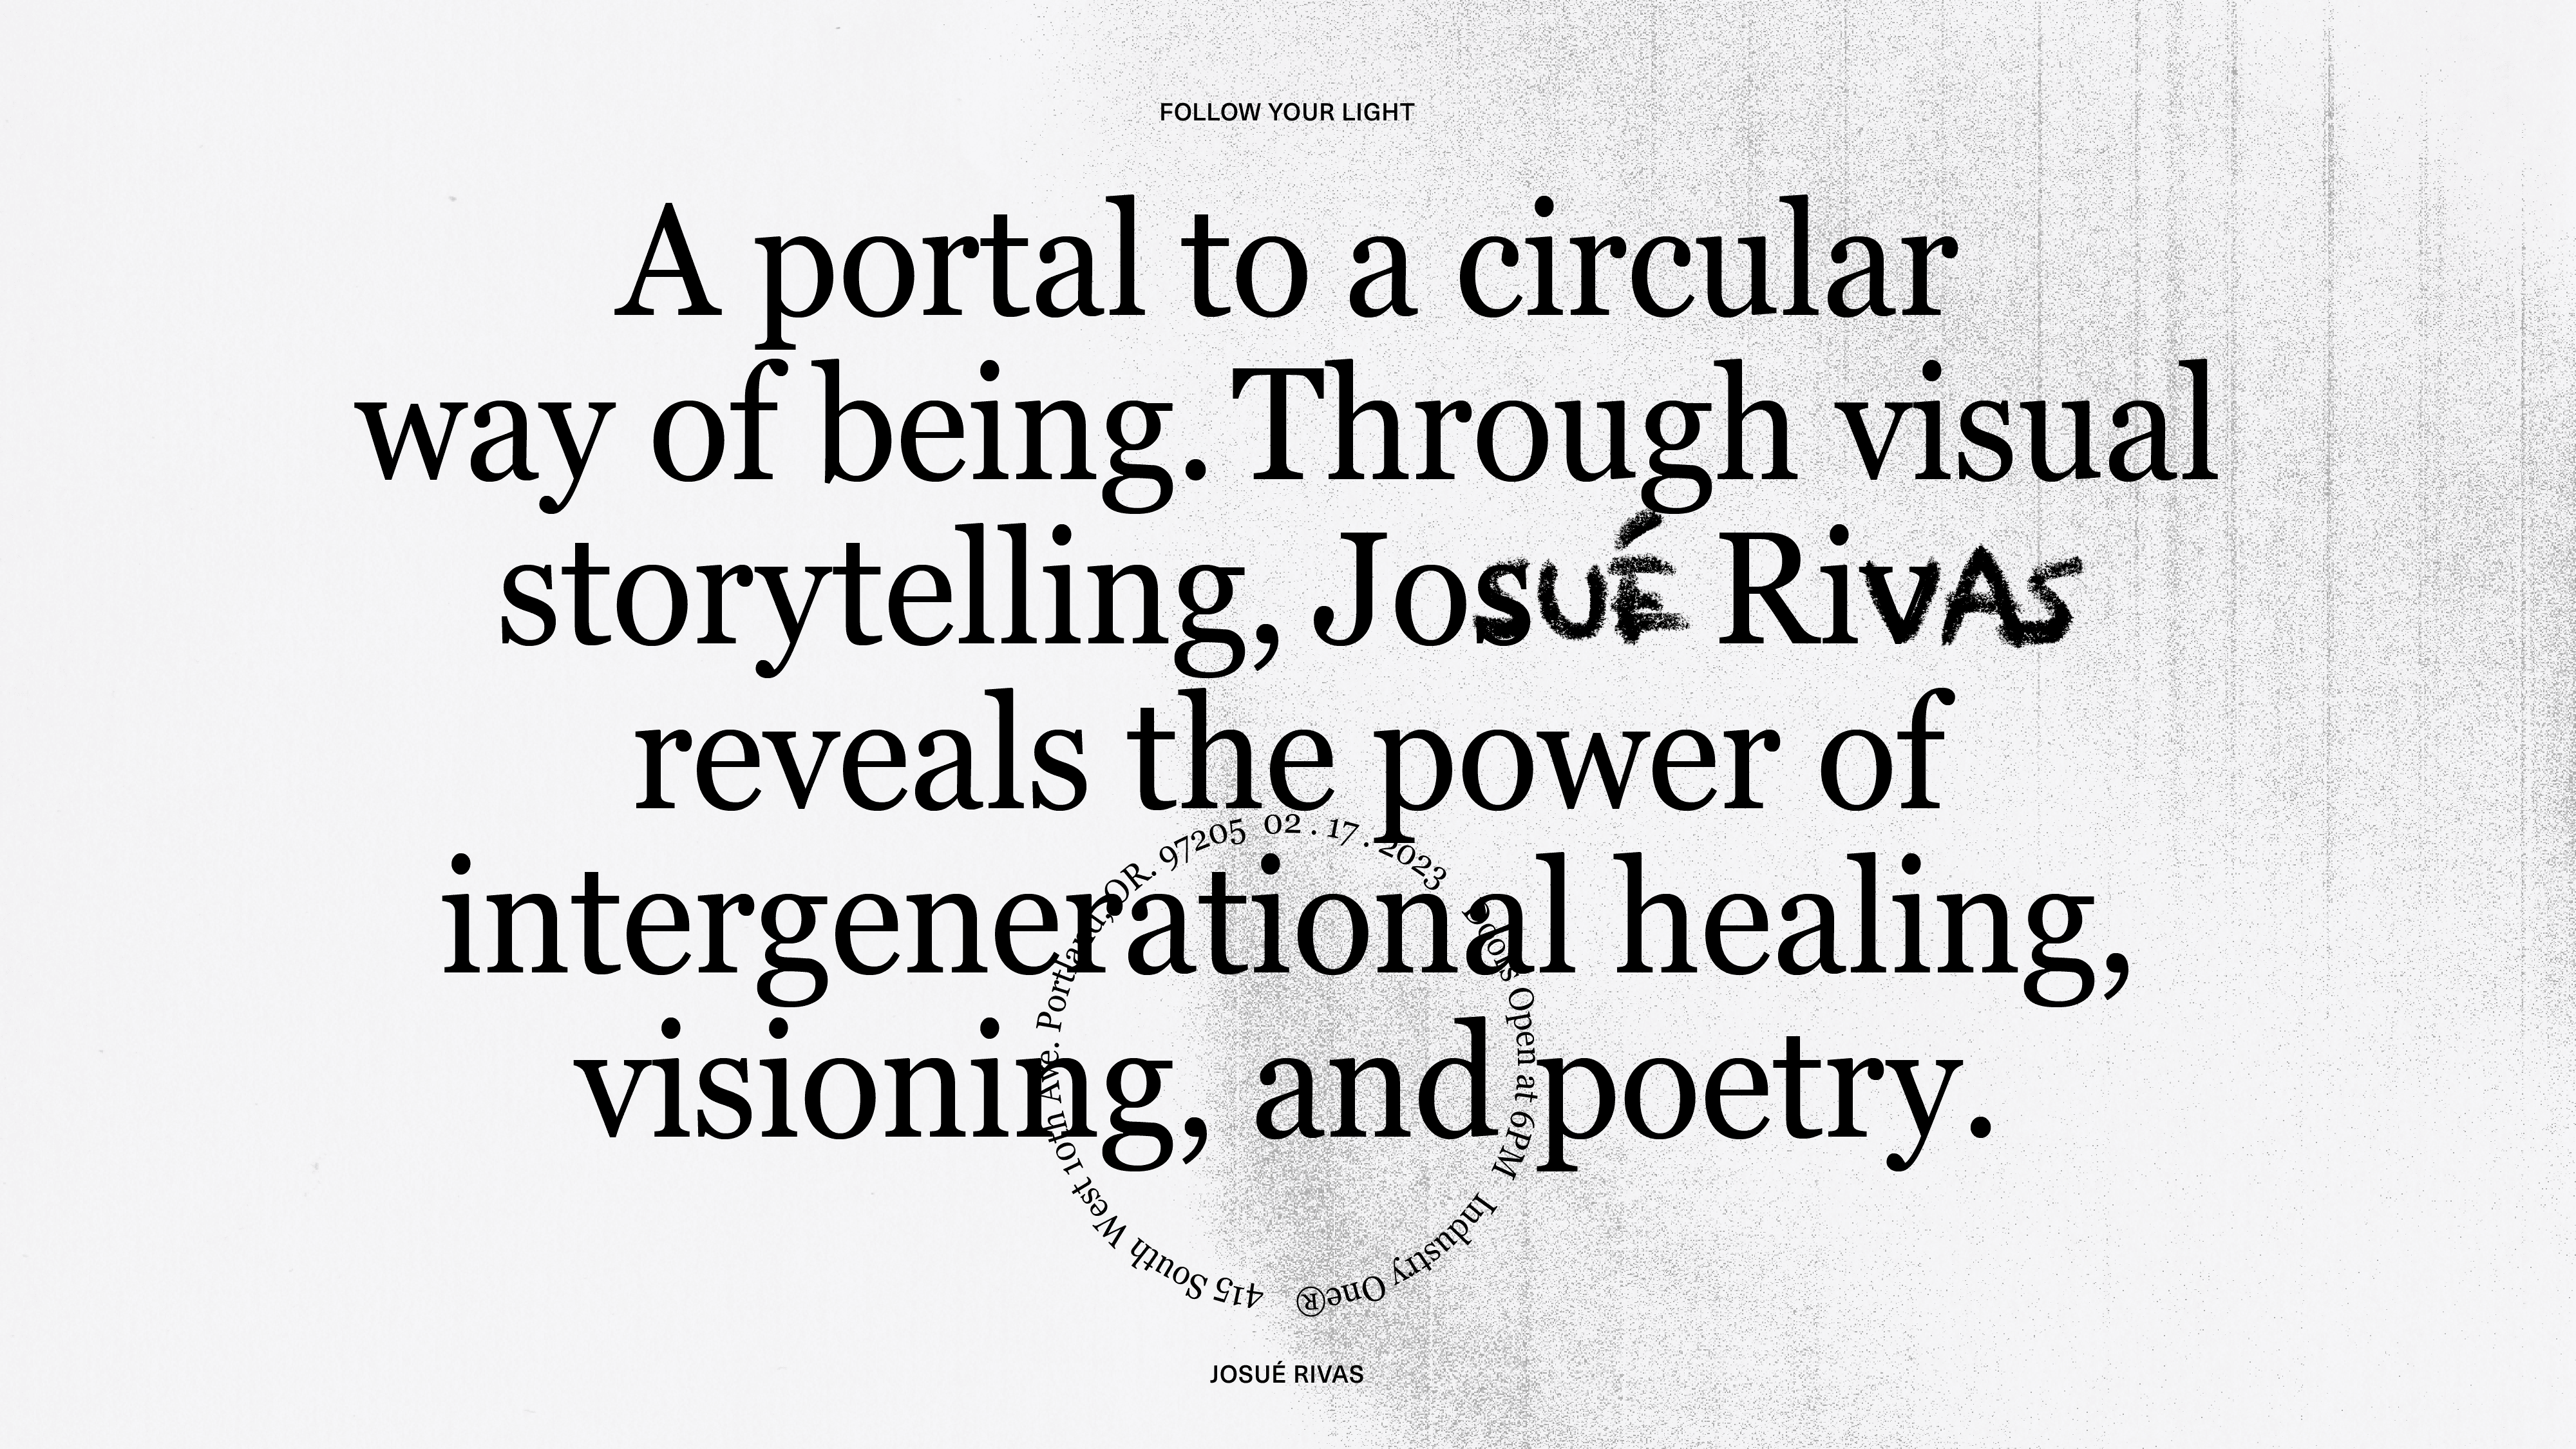 A portal to a circular way of being. Through visual storytelling, Josue Riv reveals the power of intergenerational healing, visioning,and poetry.